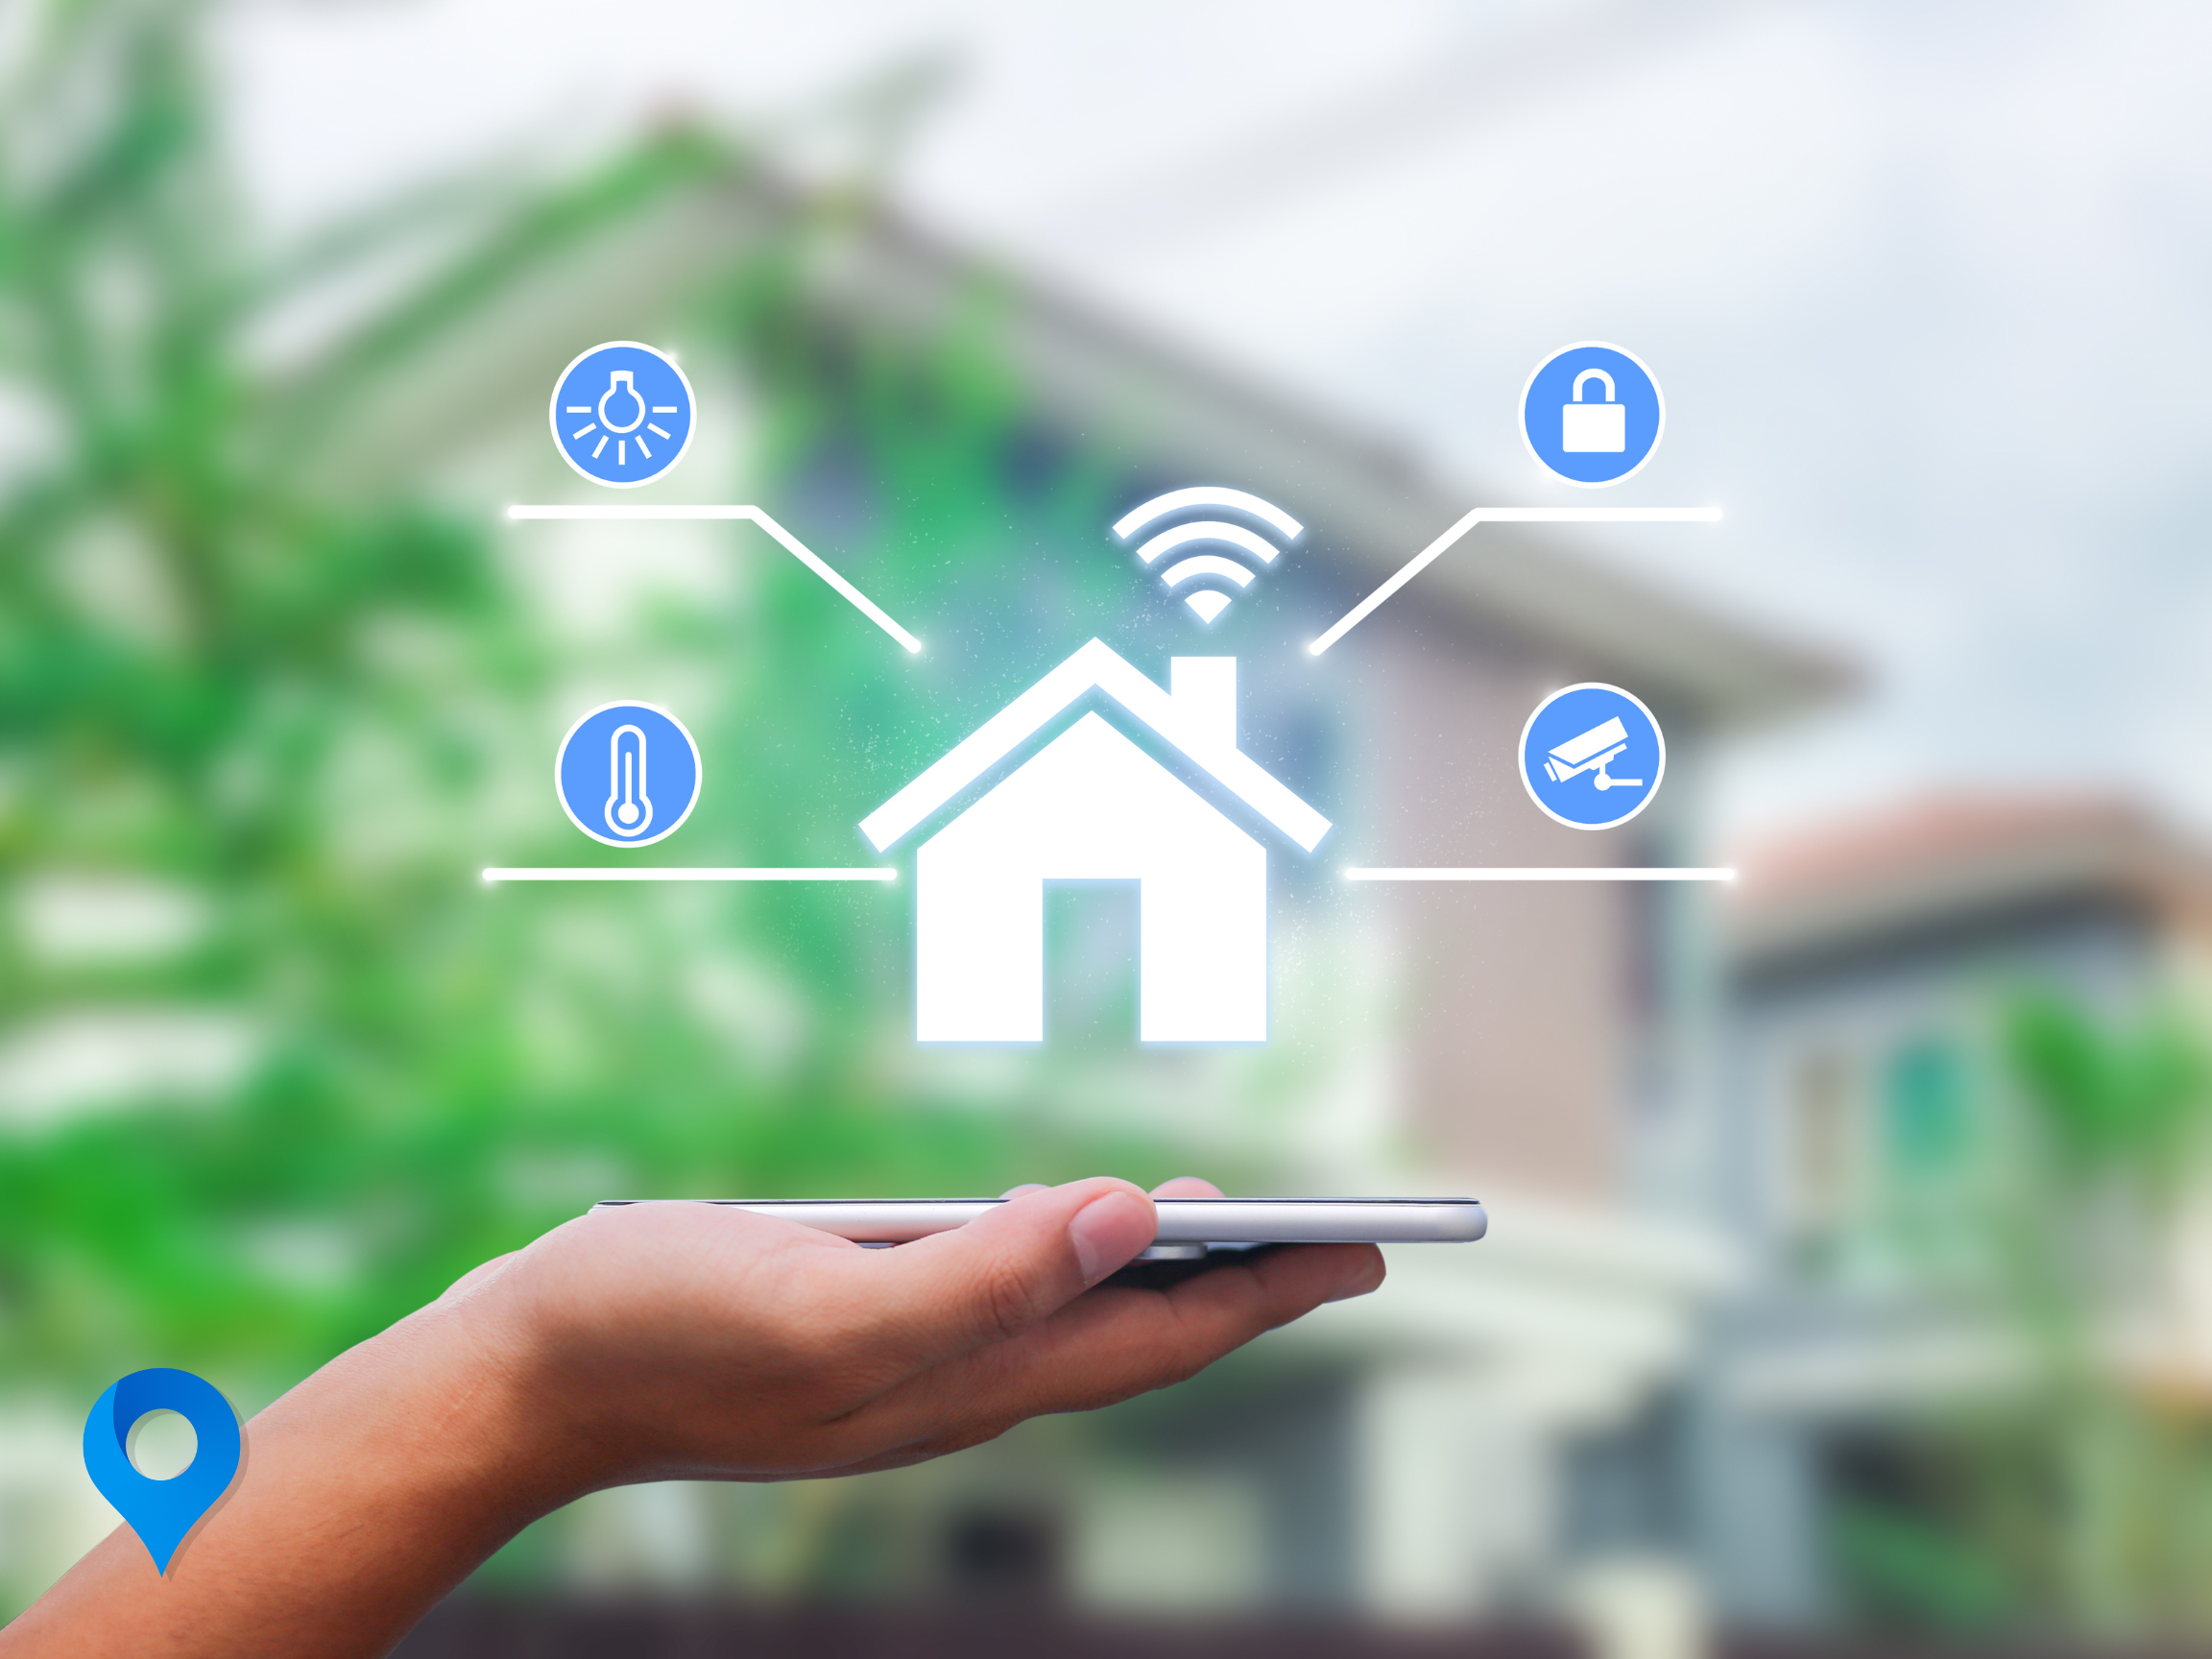 What Smart Home Technologies Can Improve Convenience and Efficiency in My Murfreesboro Home?